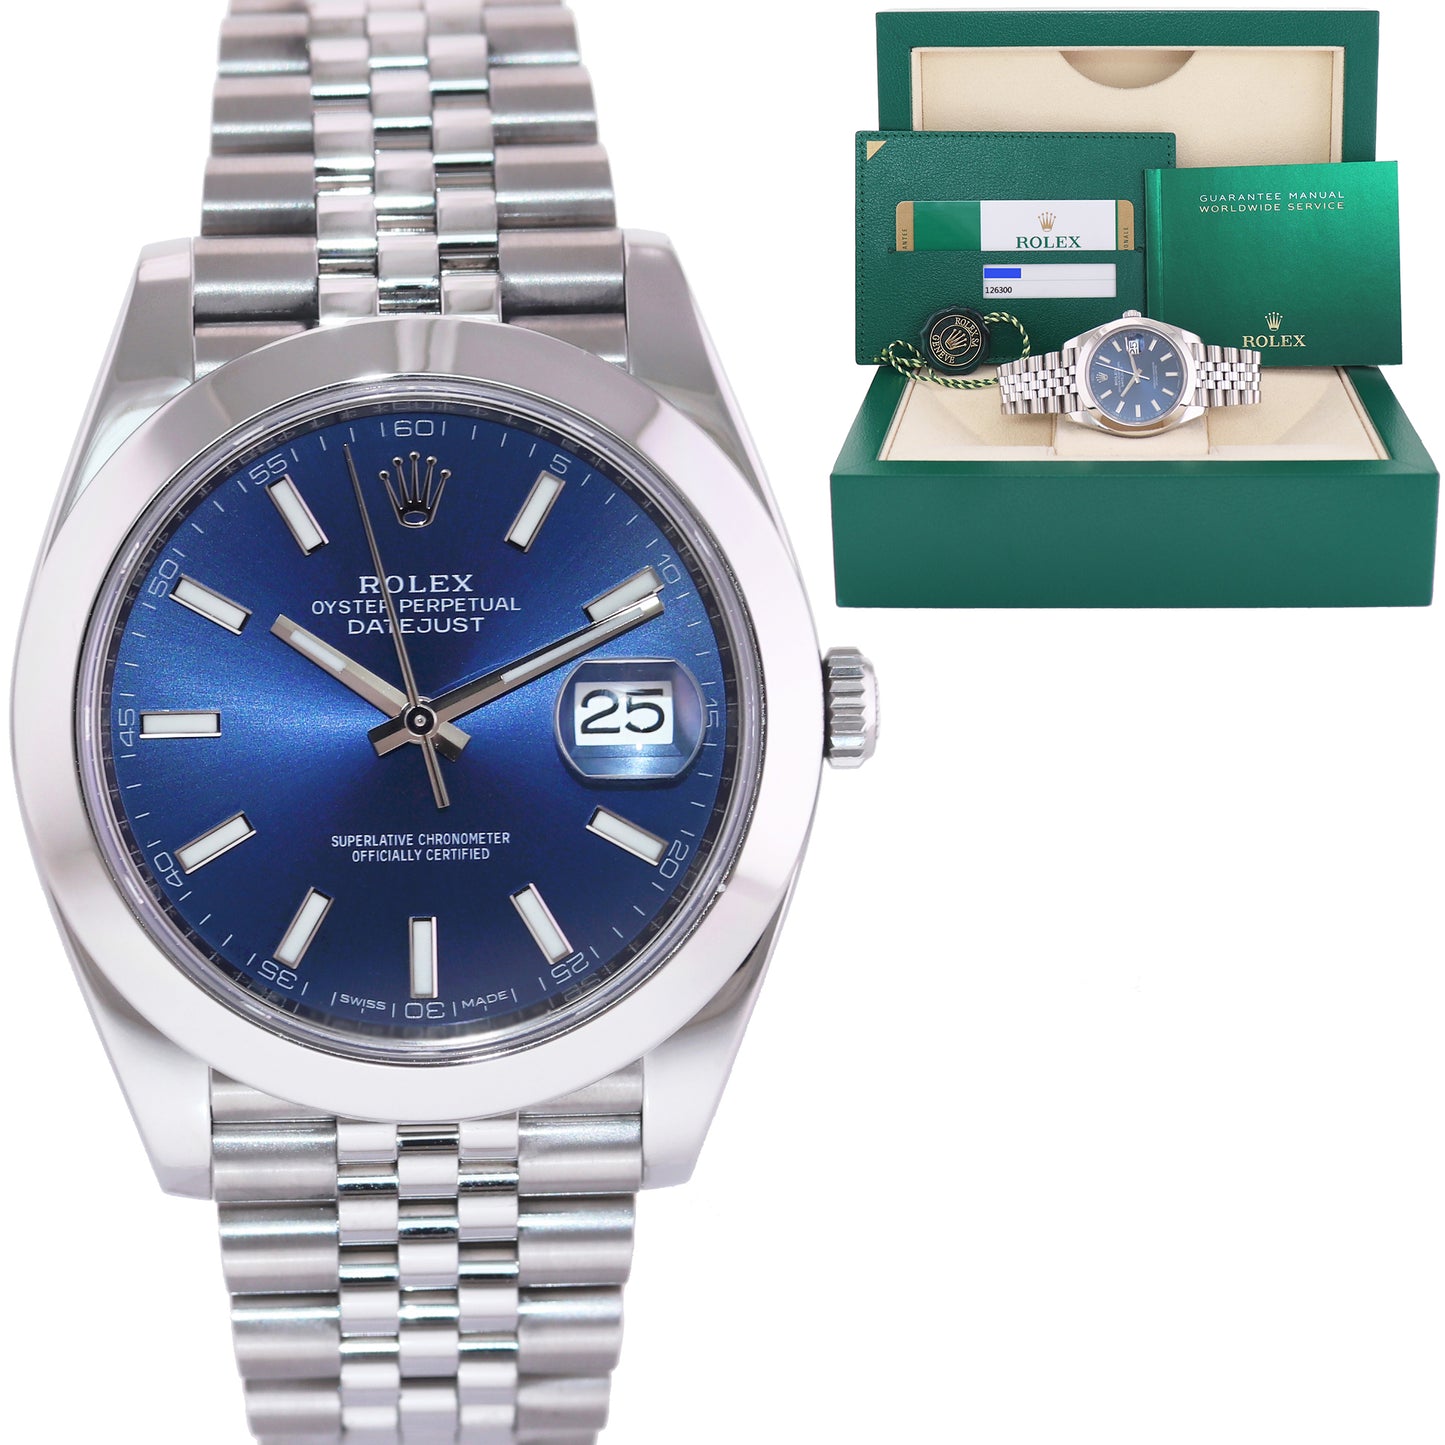 PAPERS MINT Rolex DateJust 41 Steel 126300 Blue Dial Jubilee Band 41mm Watch Box